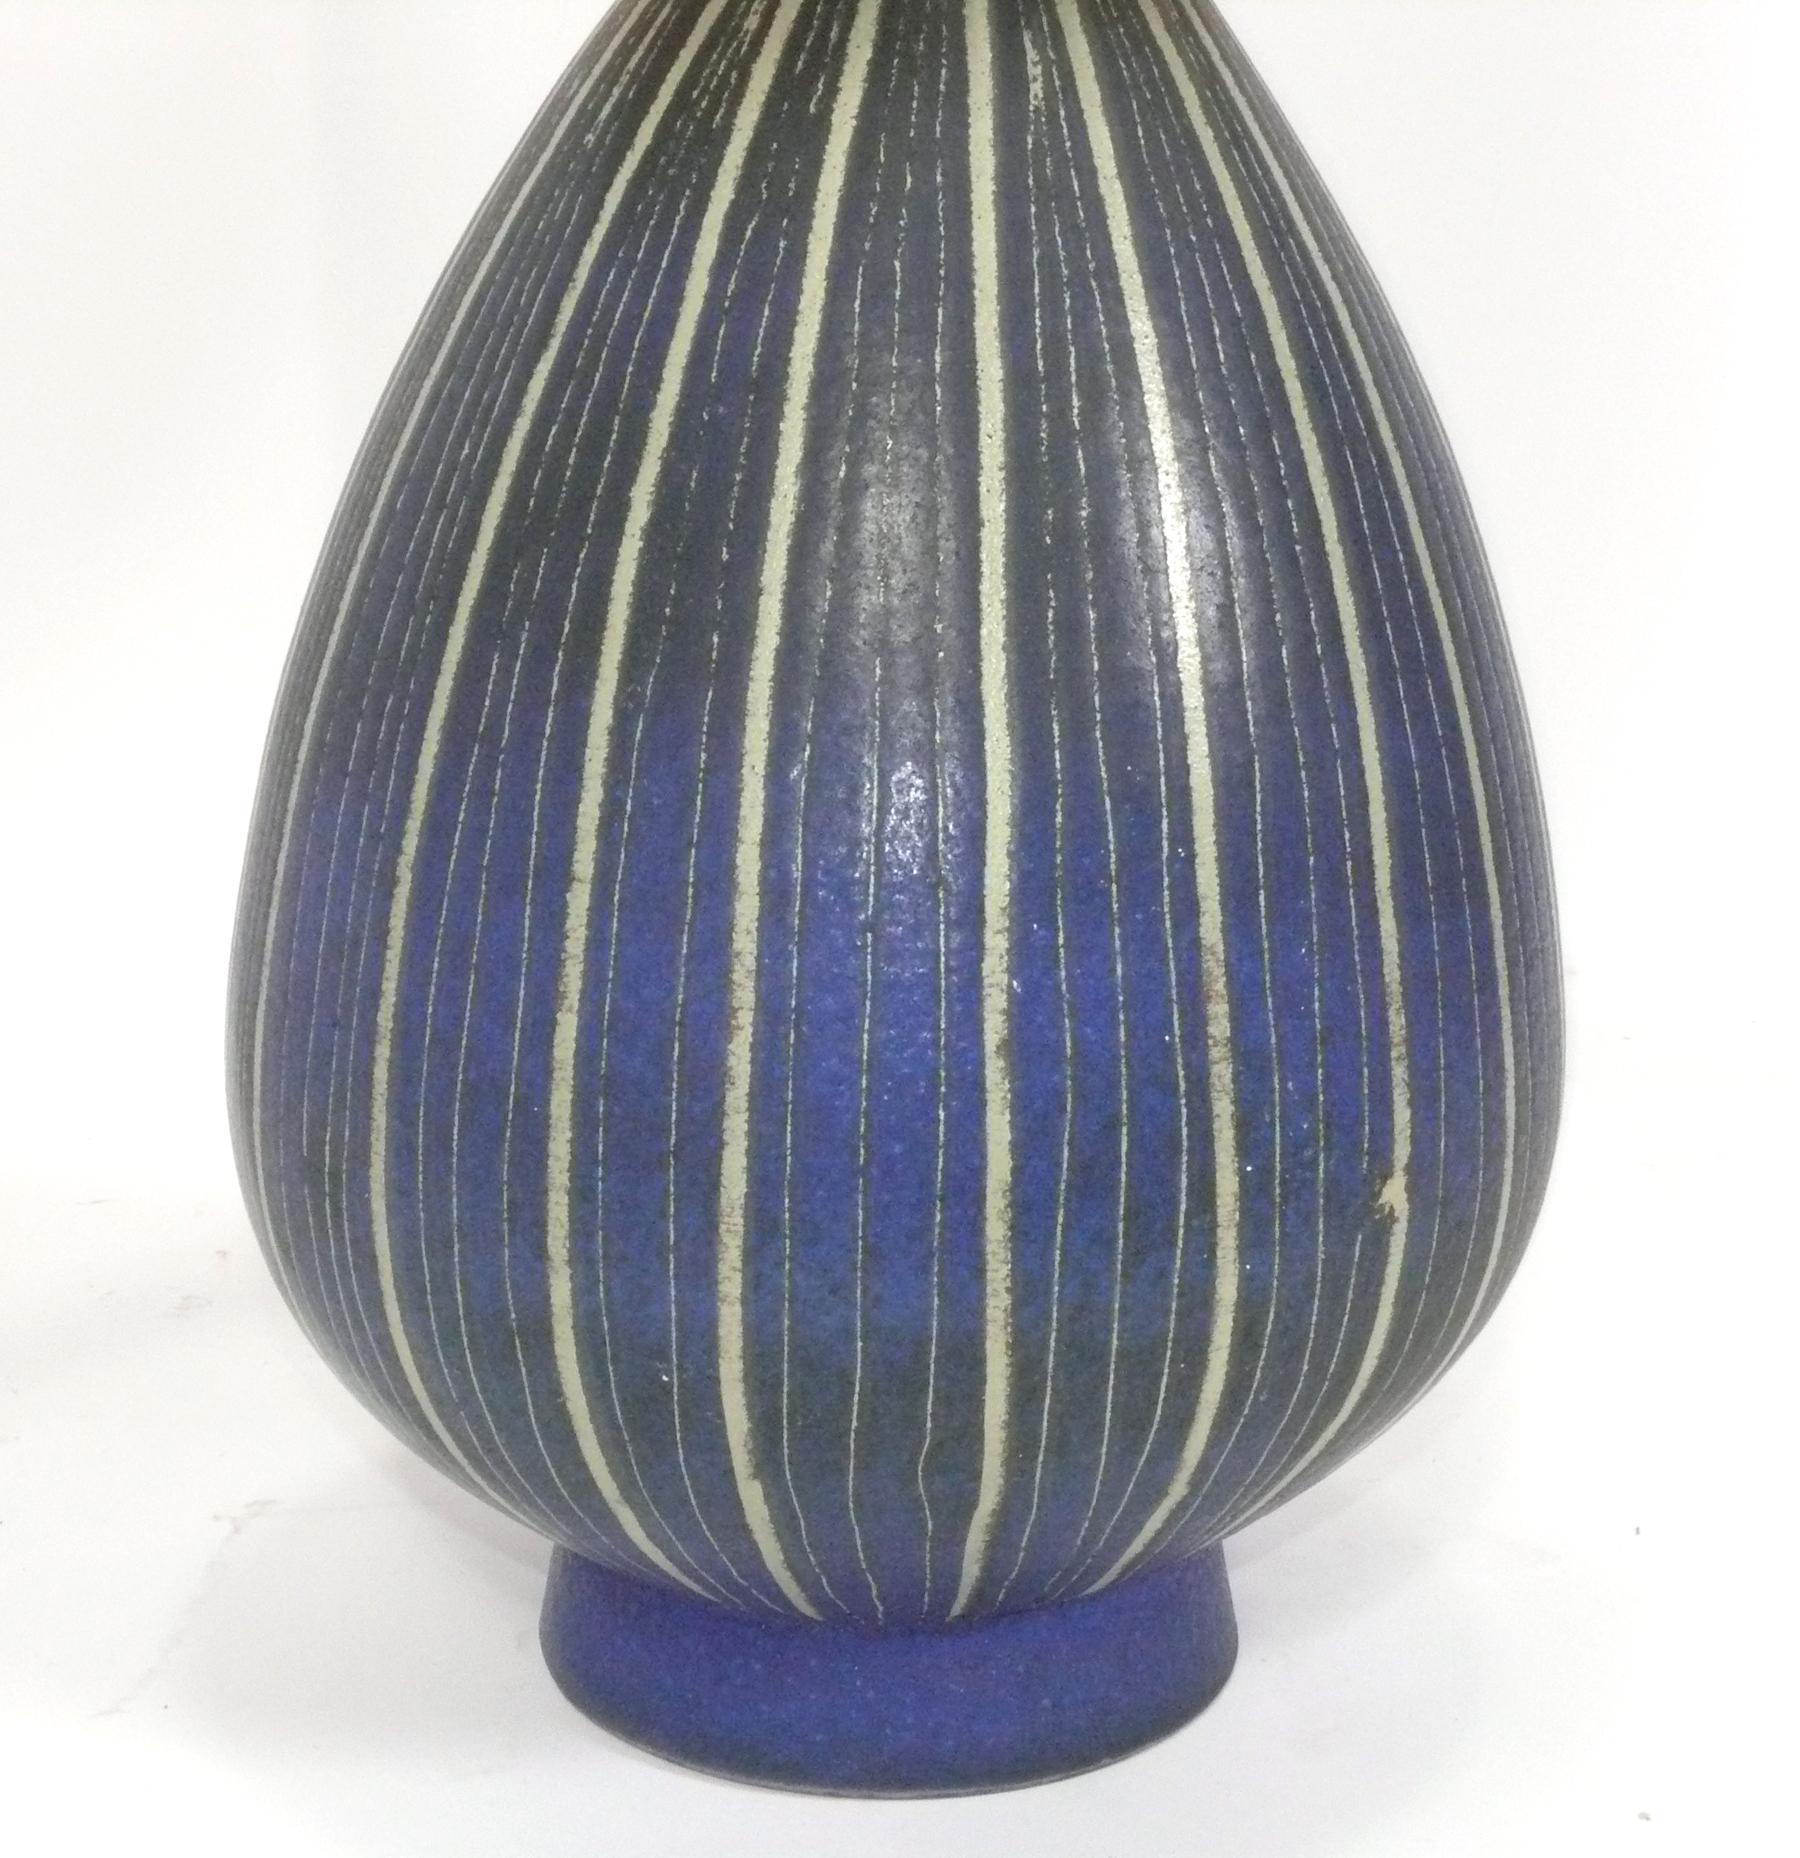 Sculptural bulbous striped ceramic lamp, designed by Lee Rosen for Design Technics, American, circa 1950s. This lamp is a large scale size with beautiful hand-painted design. It has been rewired and is ready to use.